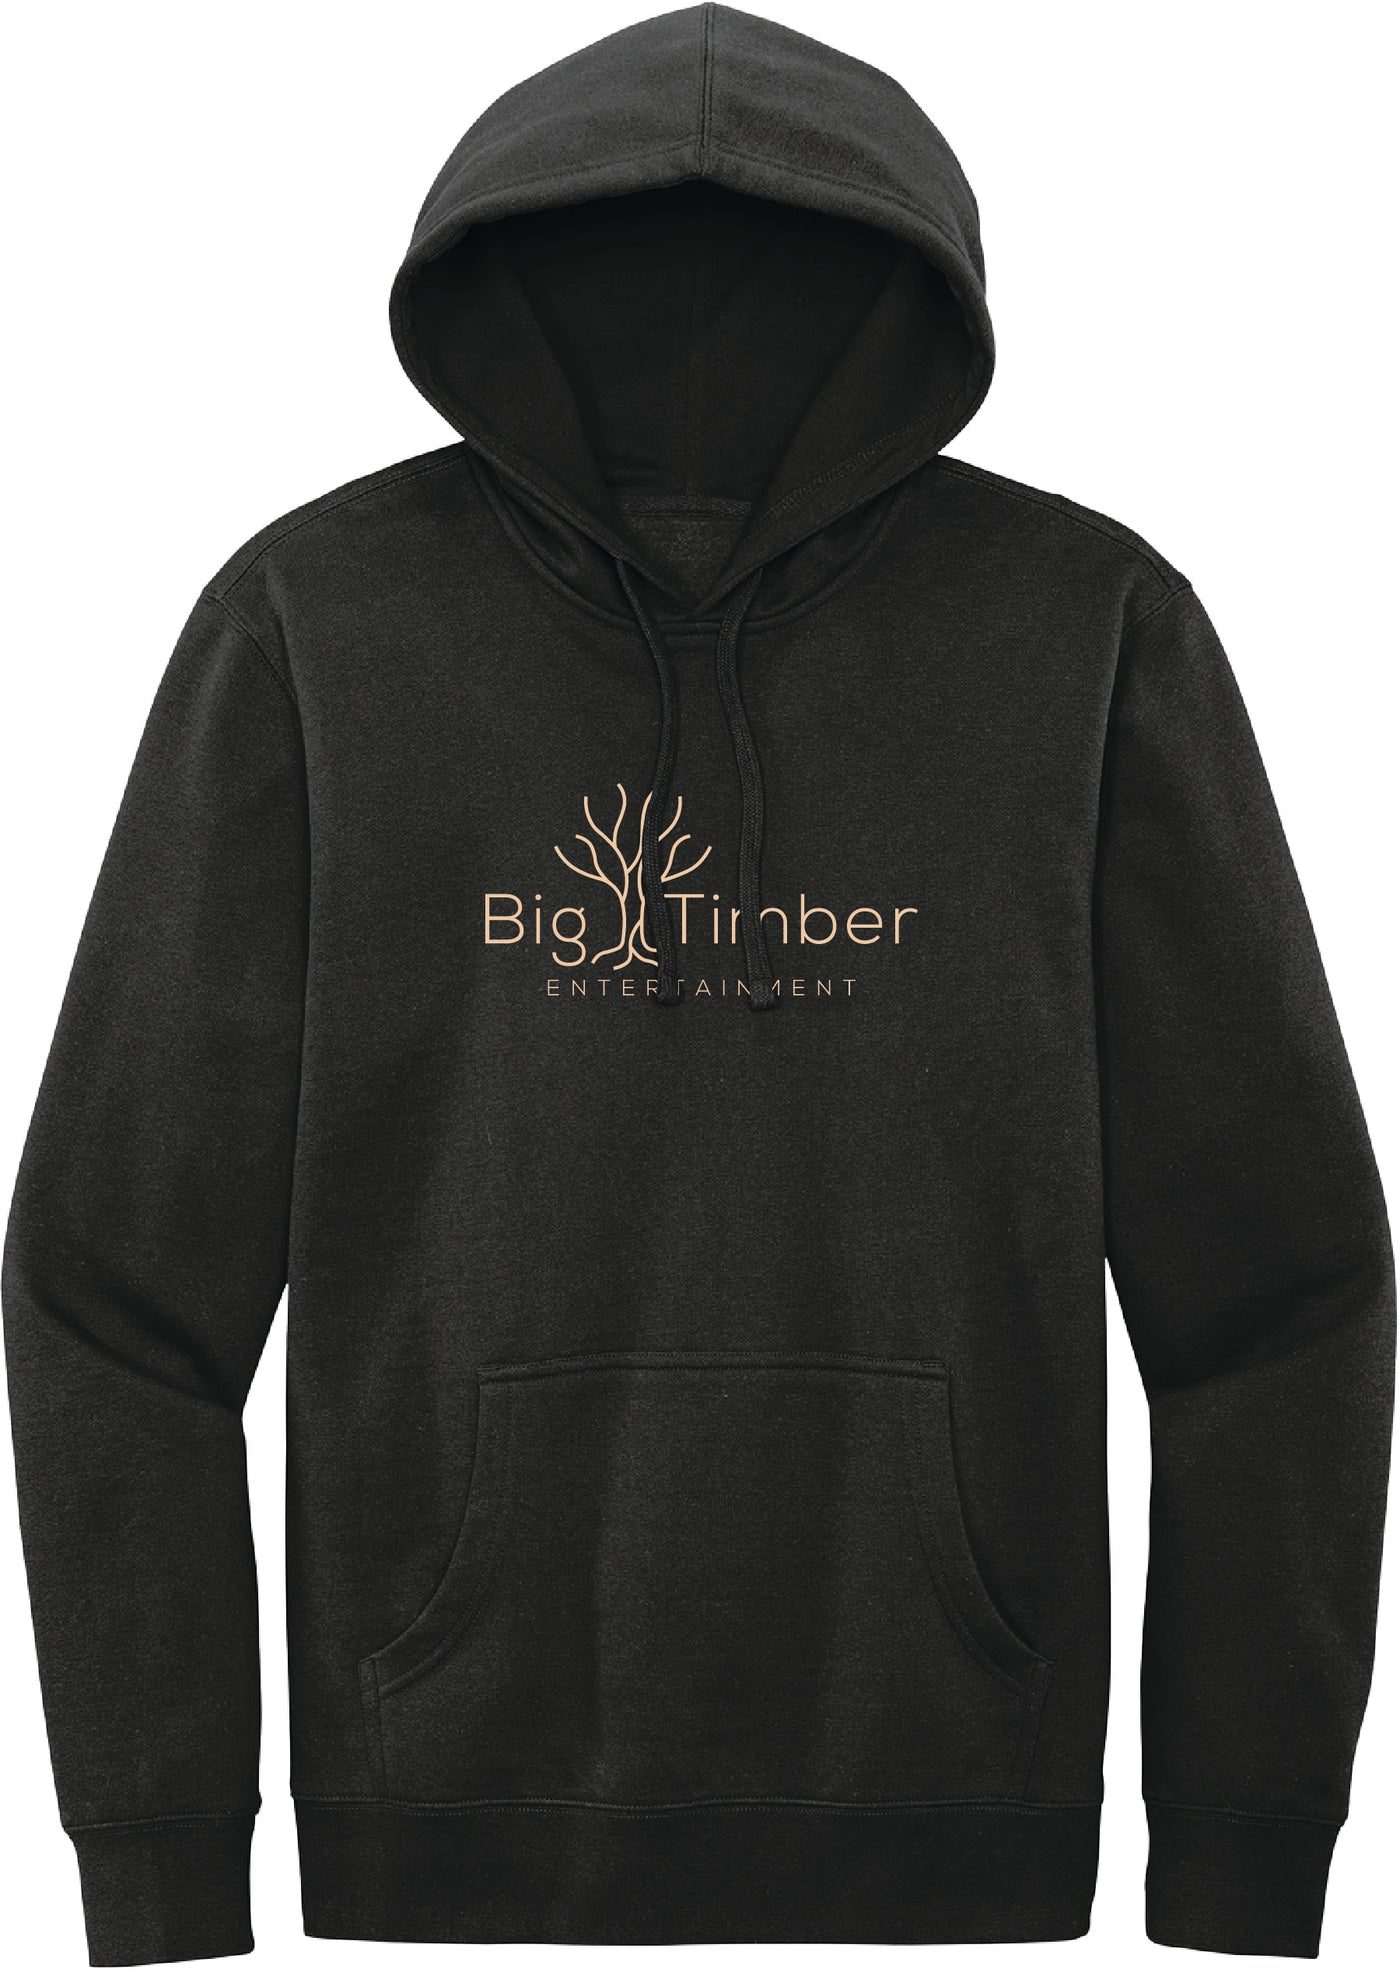 Big Timber Entertainment Hoodie. Free Shipping!